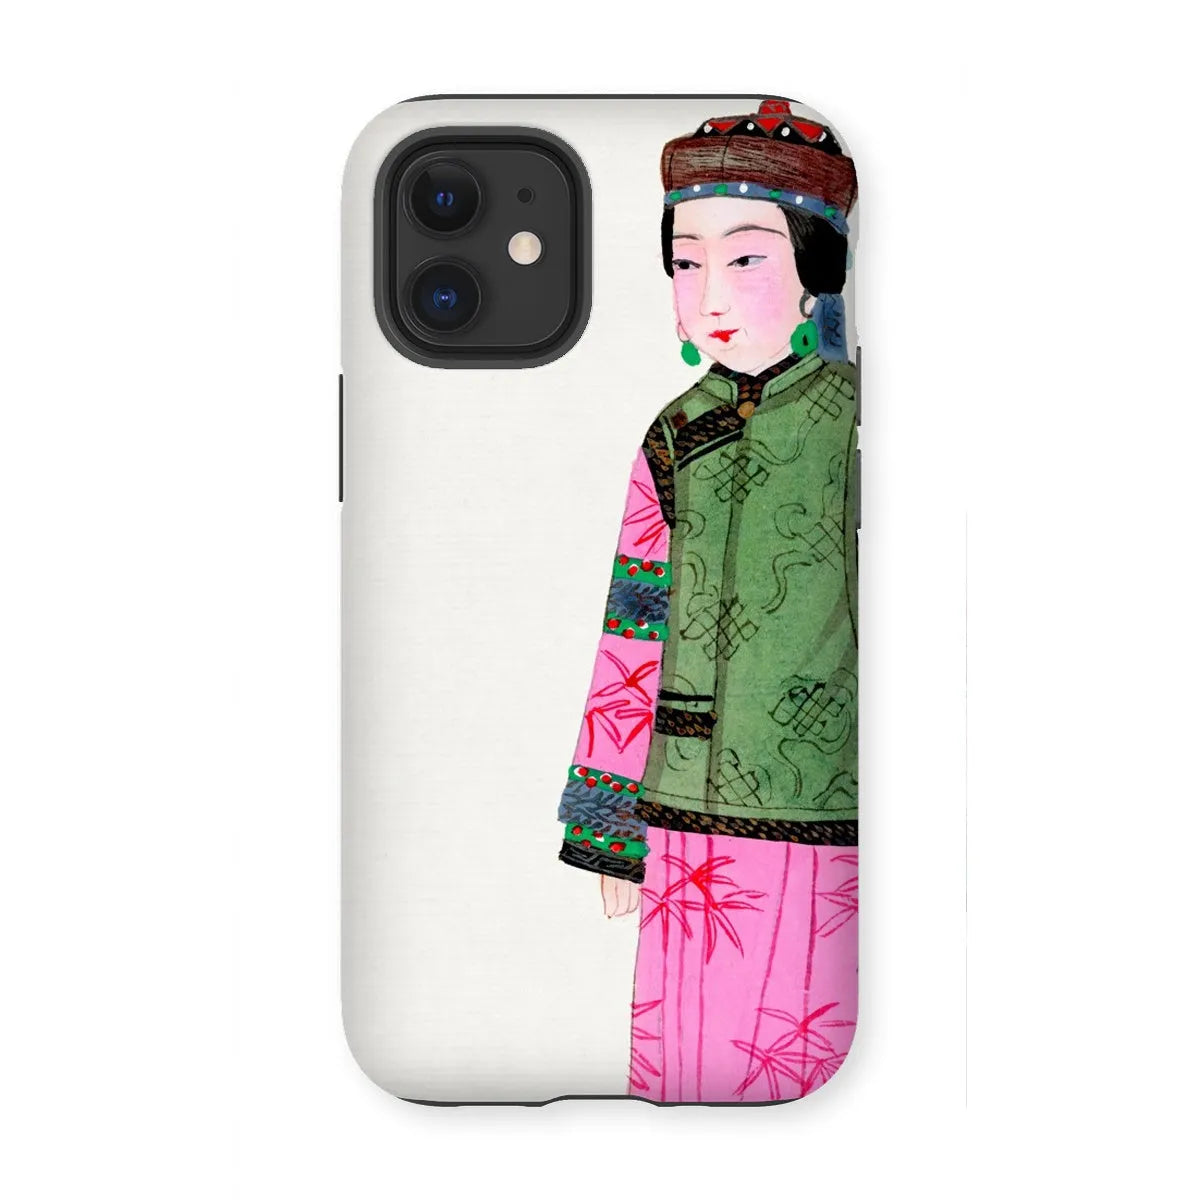 Noblewoman In Winter - Chinese Aesthetic Art Phone Case - Iphone 12 Mini / Matte - Mobile Phone Cases - Aesthetic Art